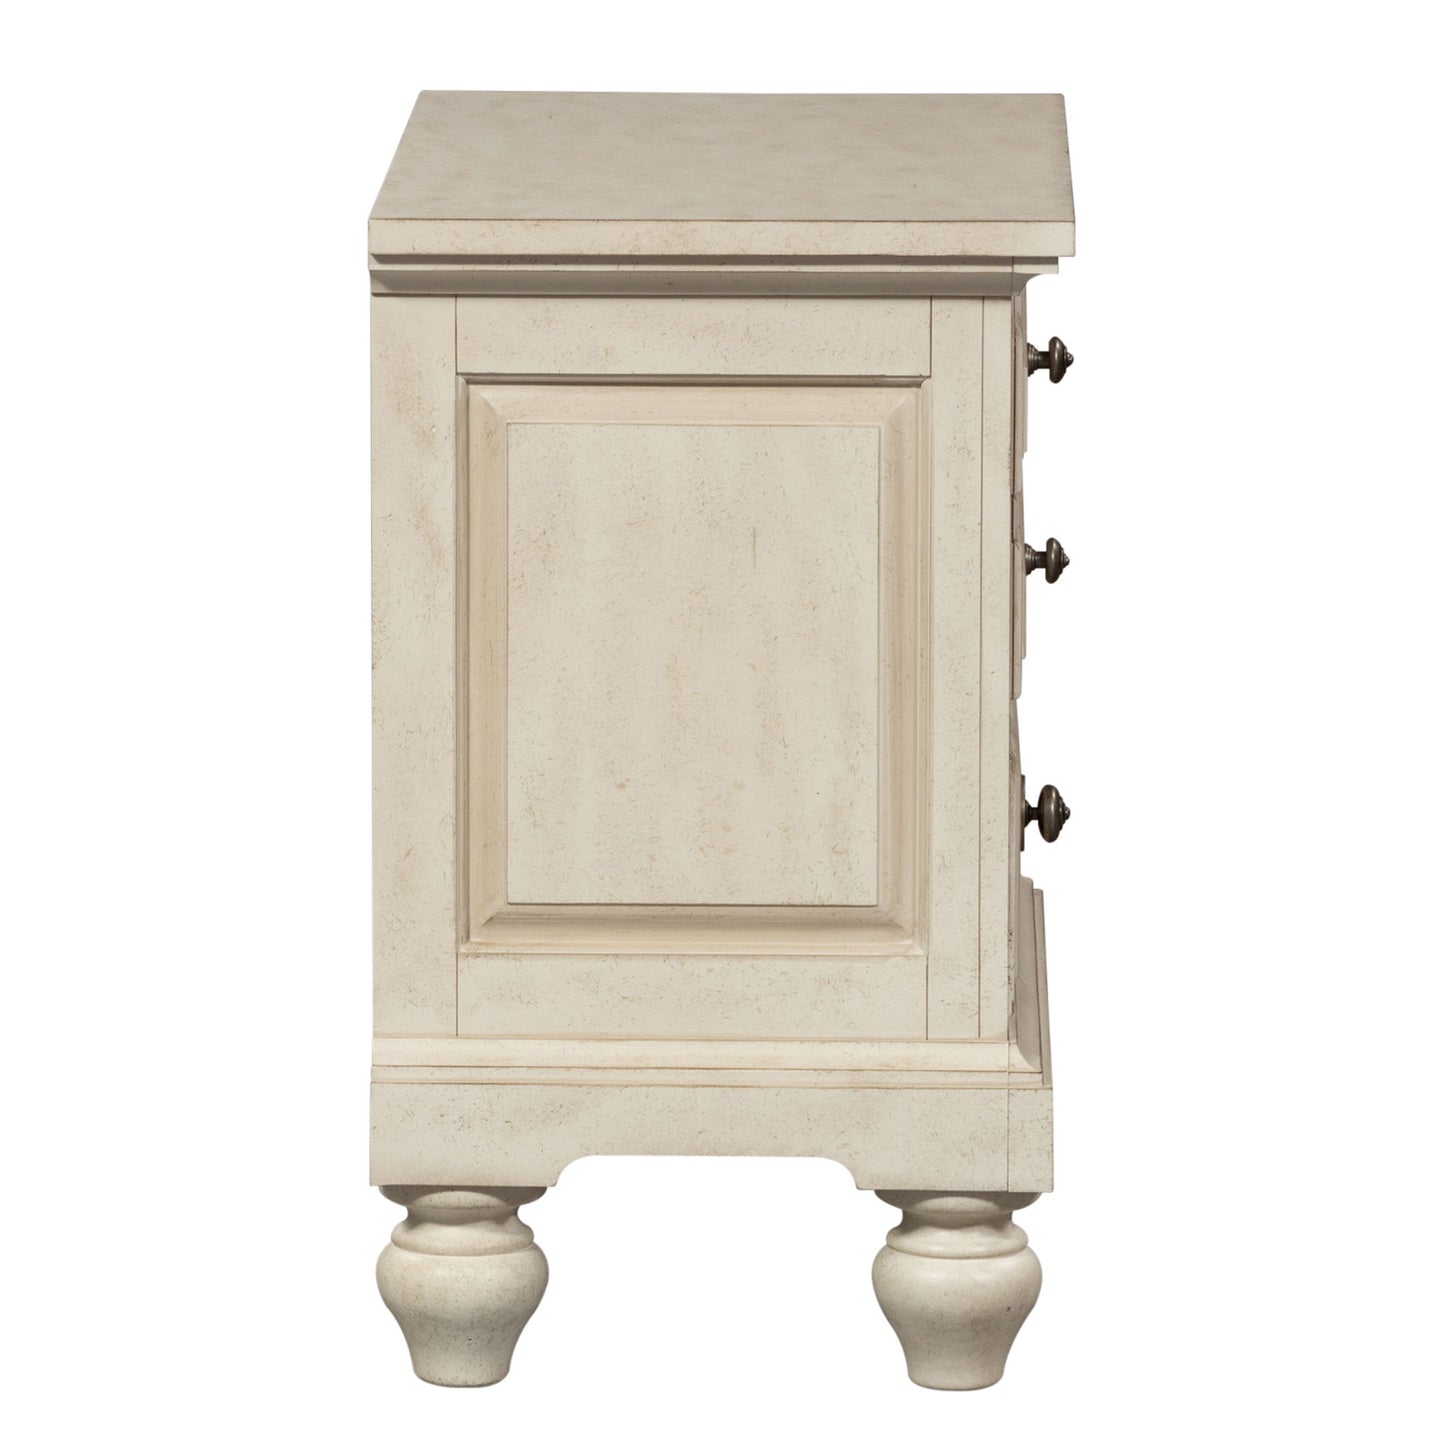 High Country - Nightstand - White